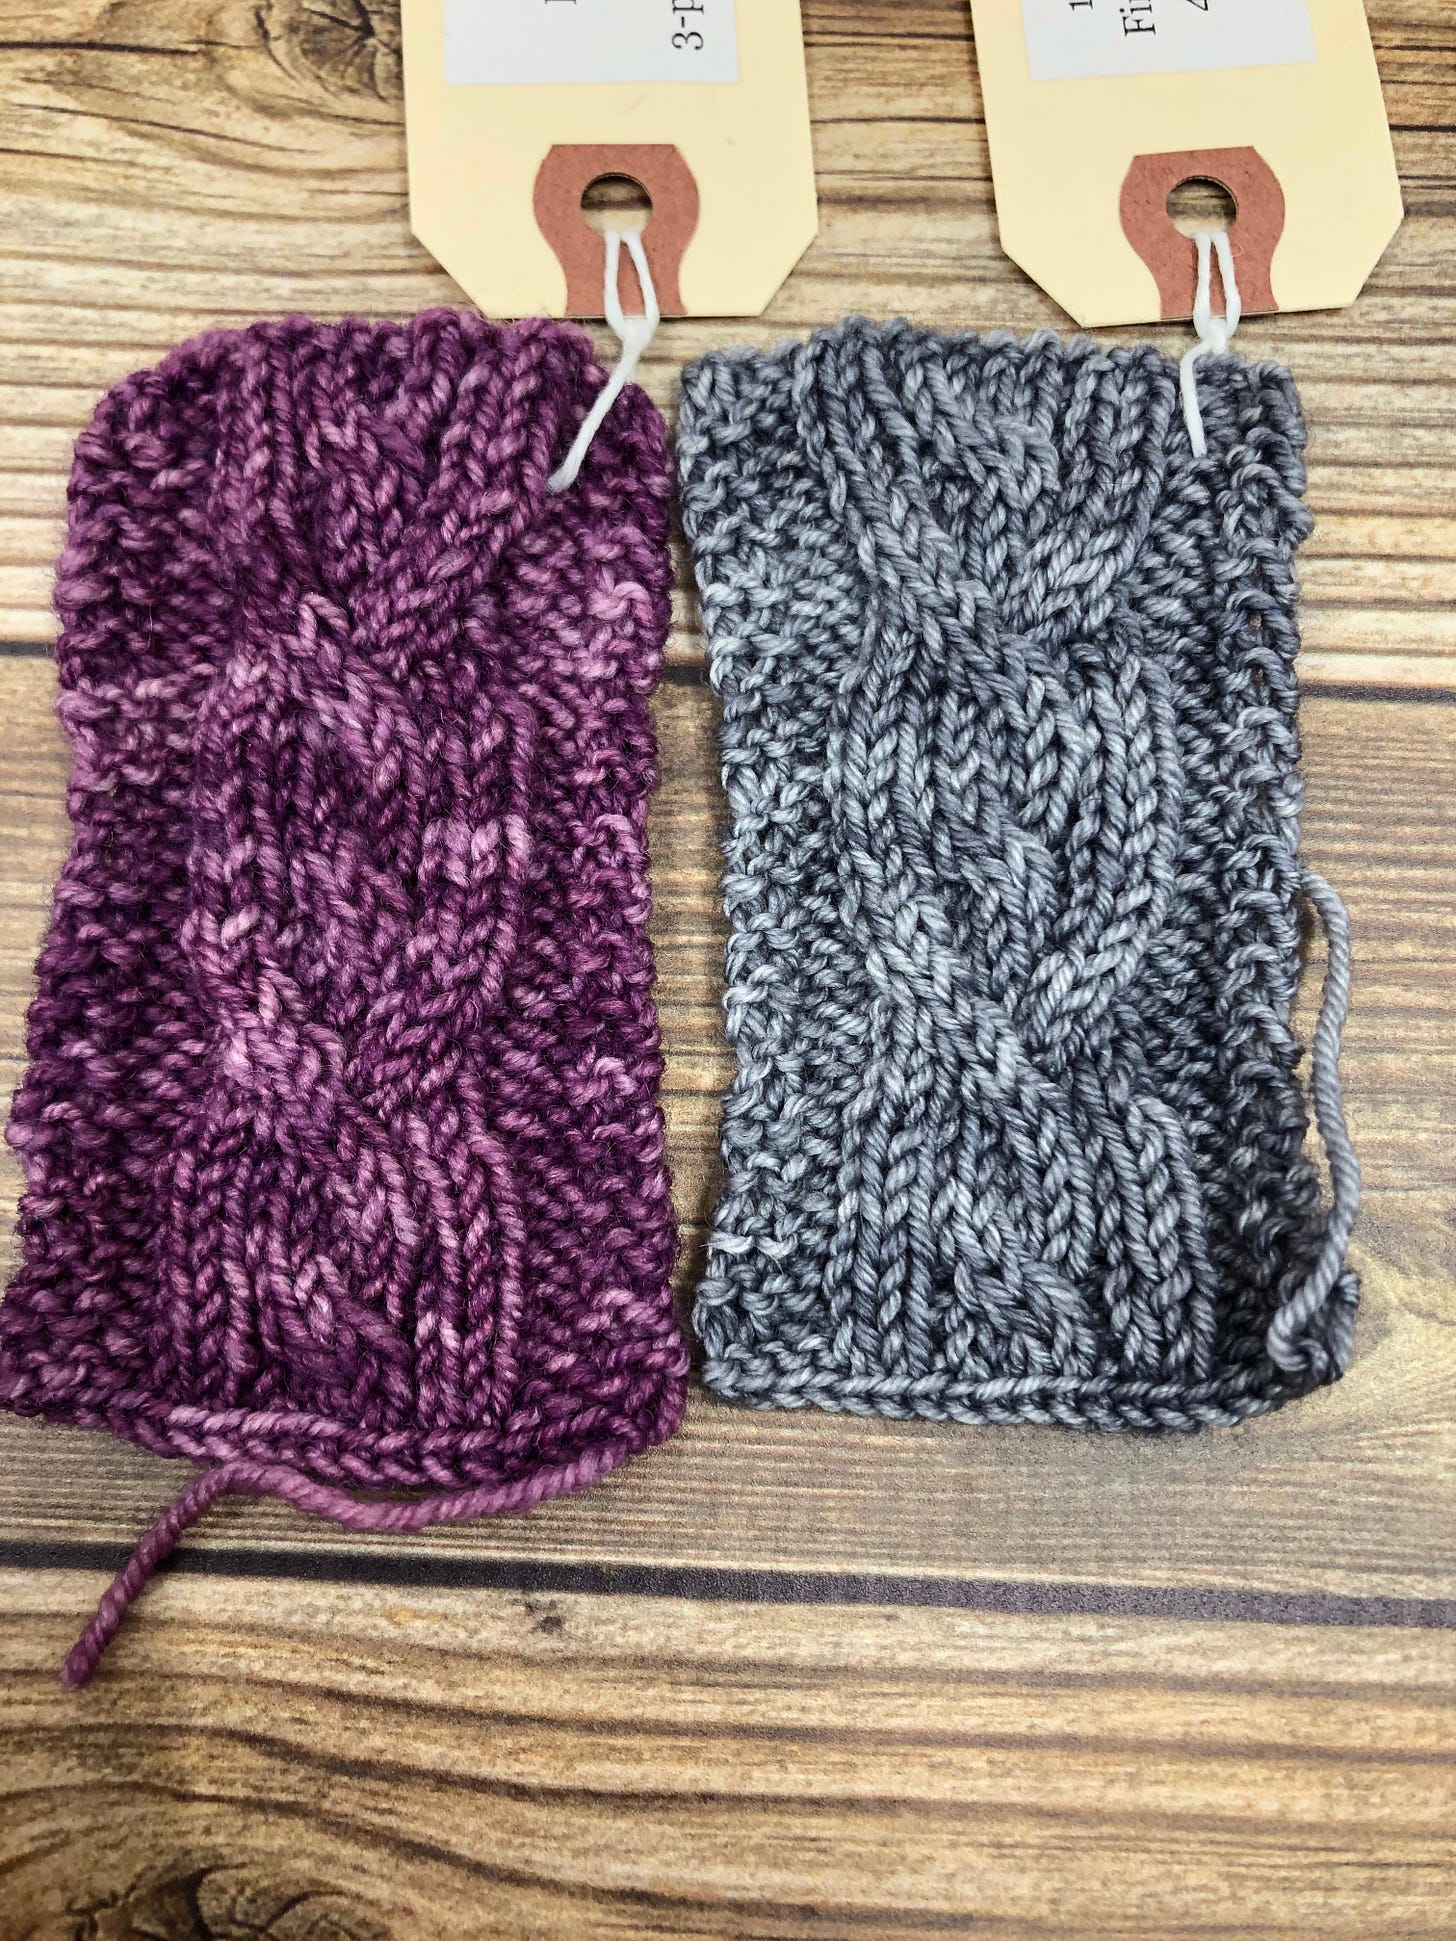 Cable swatches